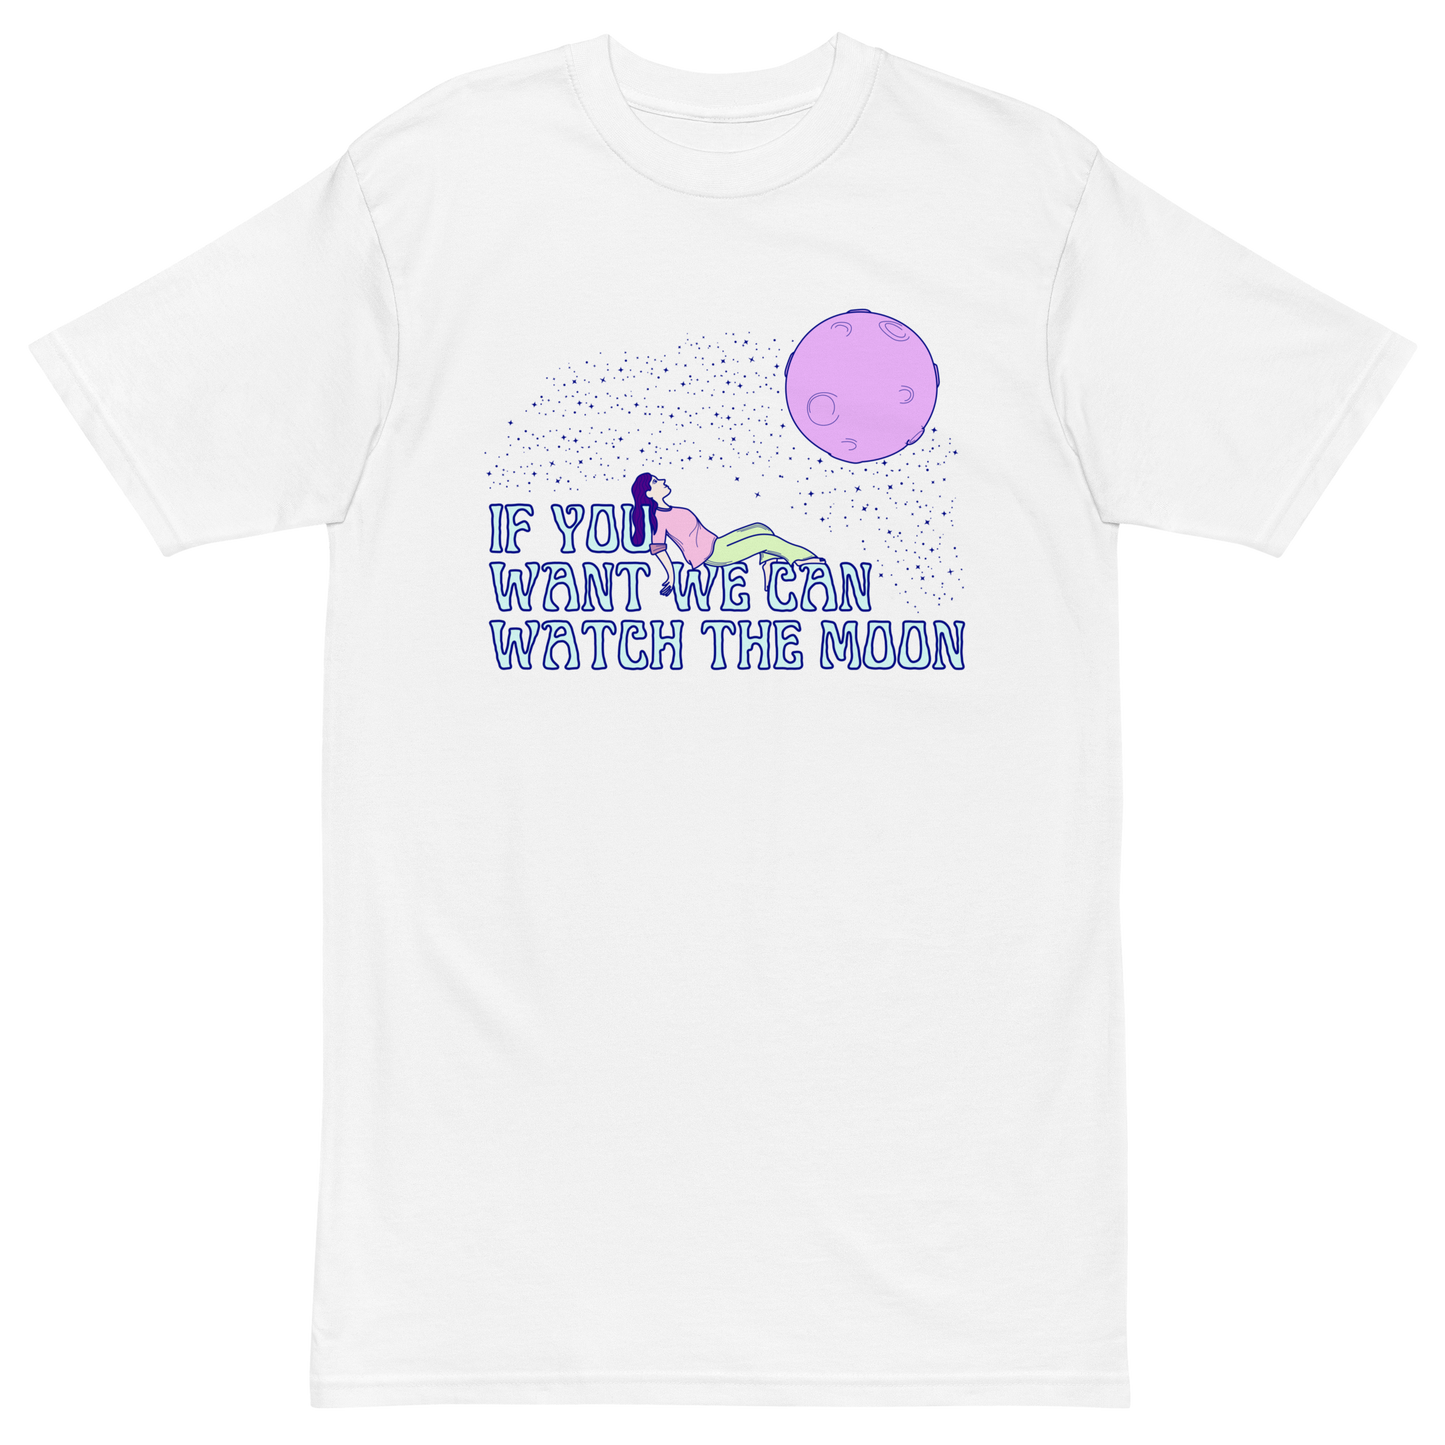 If You Want We Can Watch The Moon Premium Graphic Tee